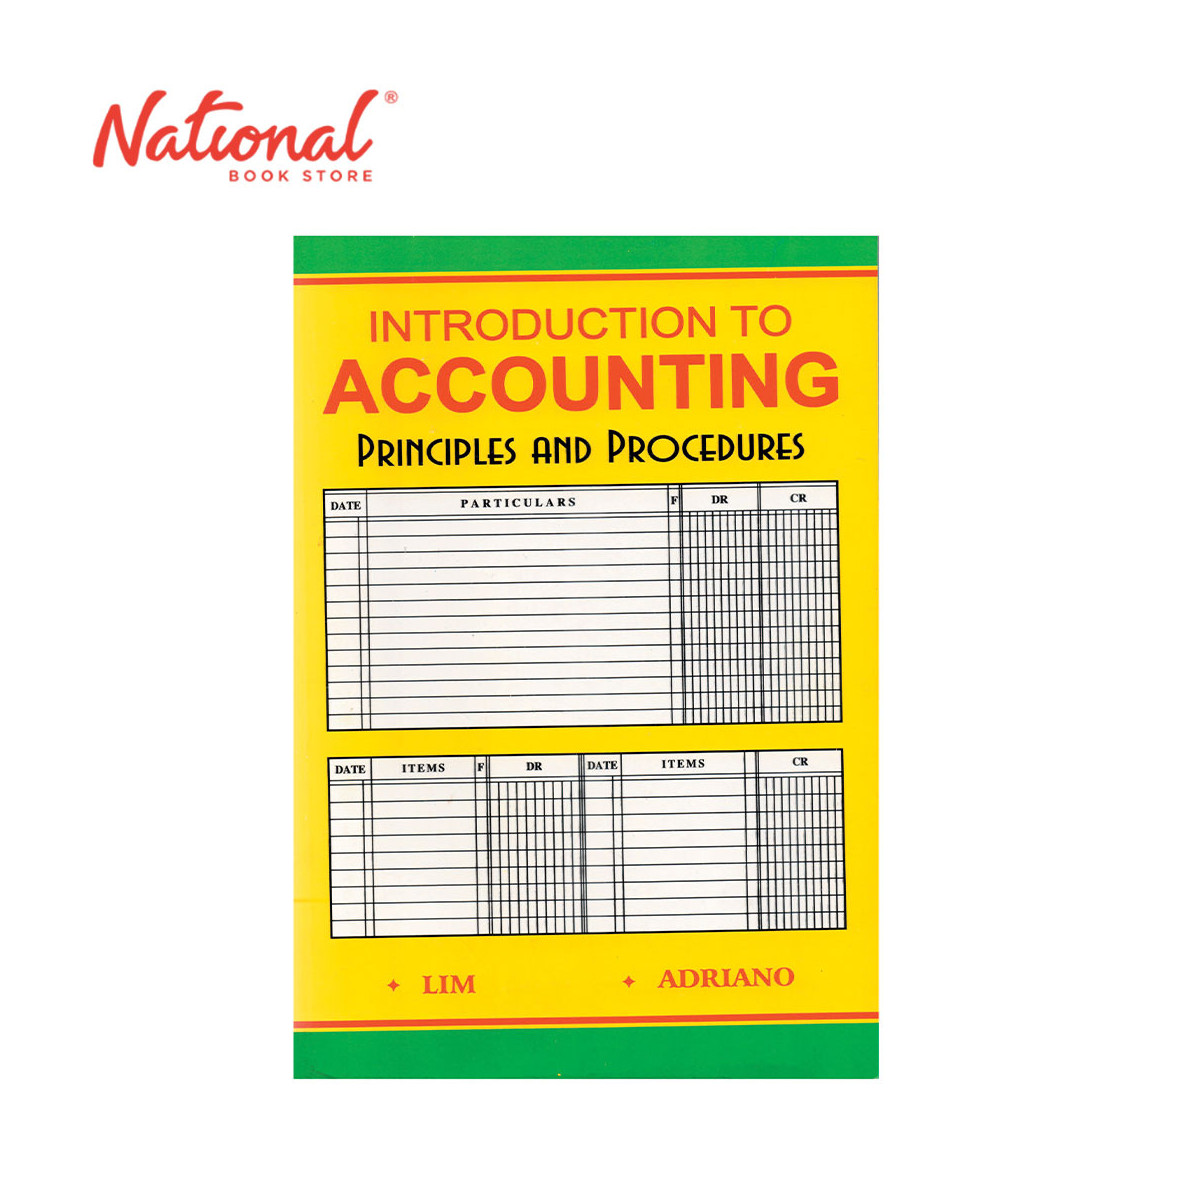 Introduction to Accounting (Principles and Procedures) by Juan Lim & Jose Adriano - Trade Paperback